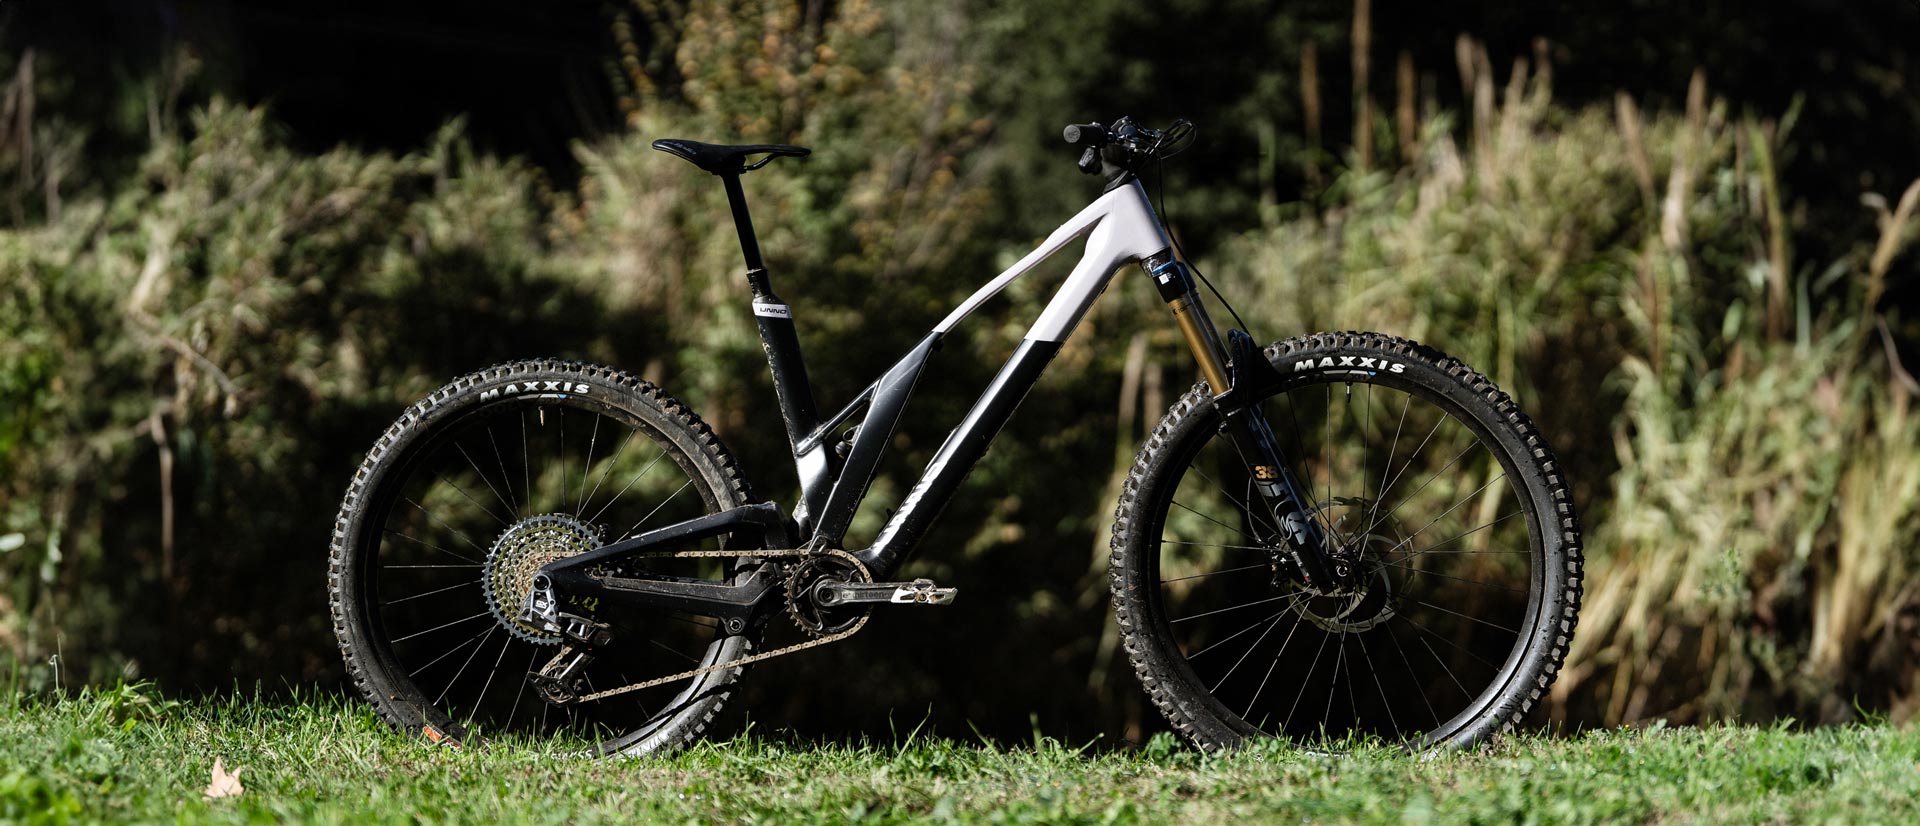 First Ride and Release: The New Unno Ikki E-Light MTB